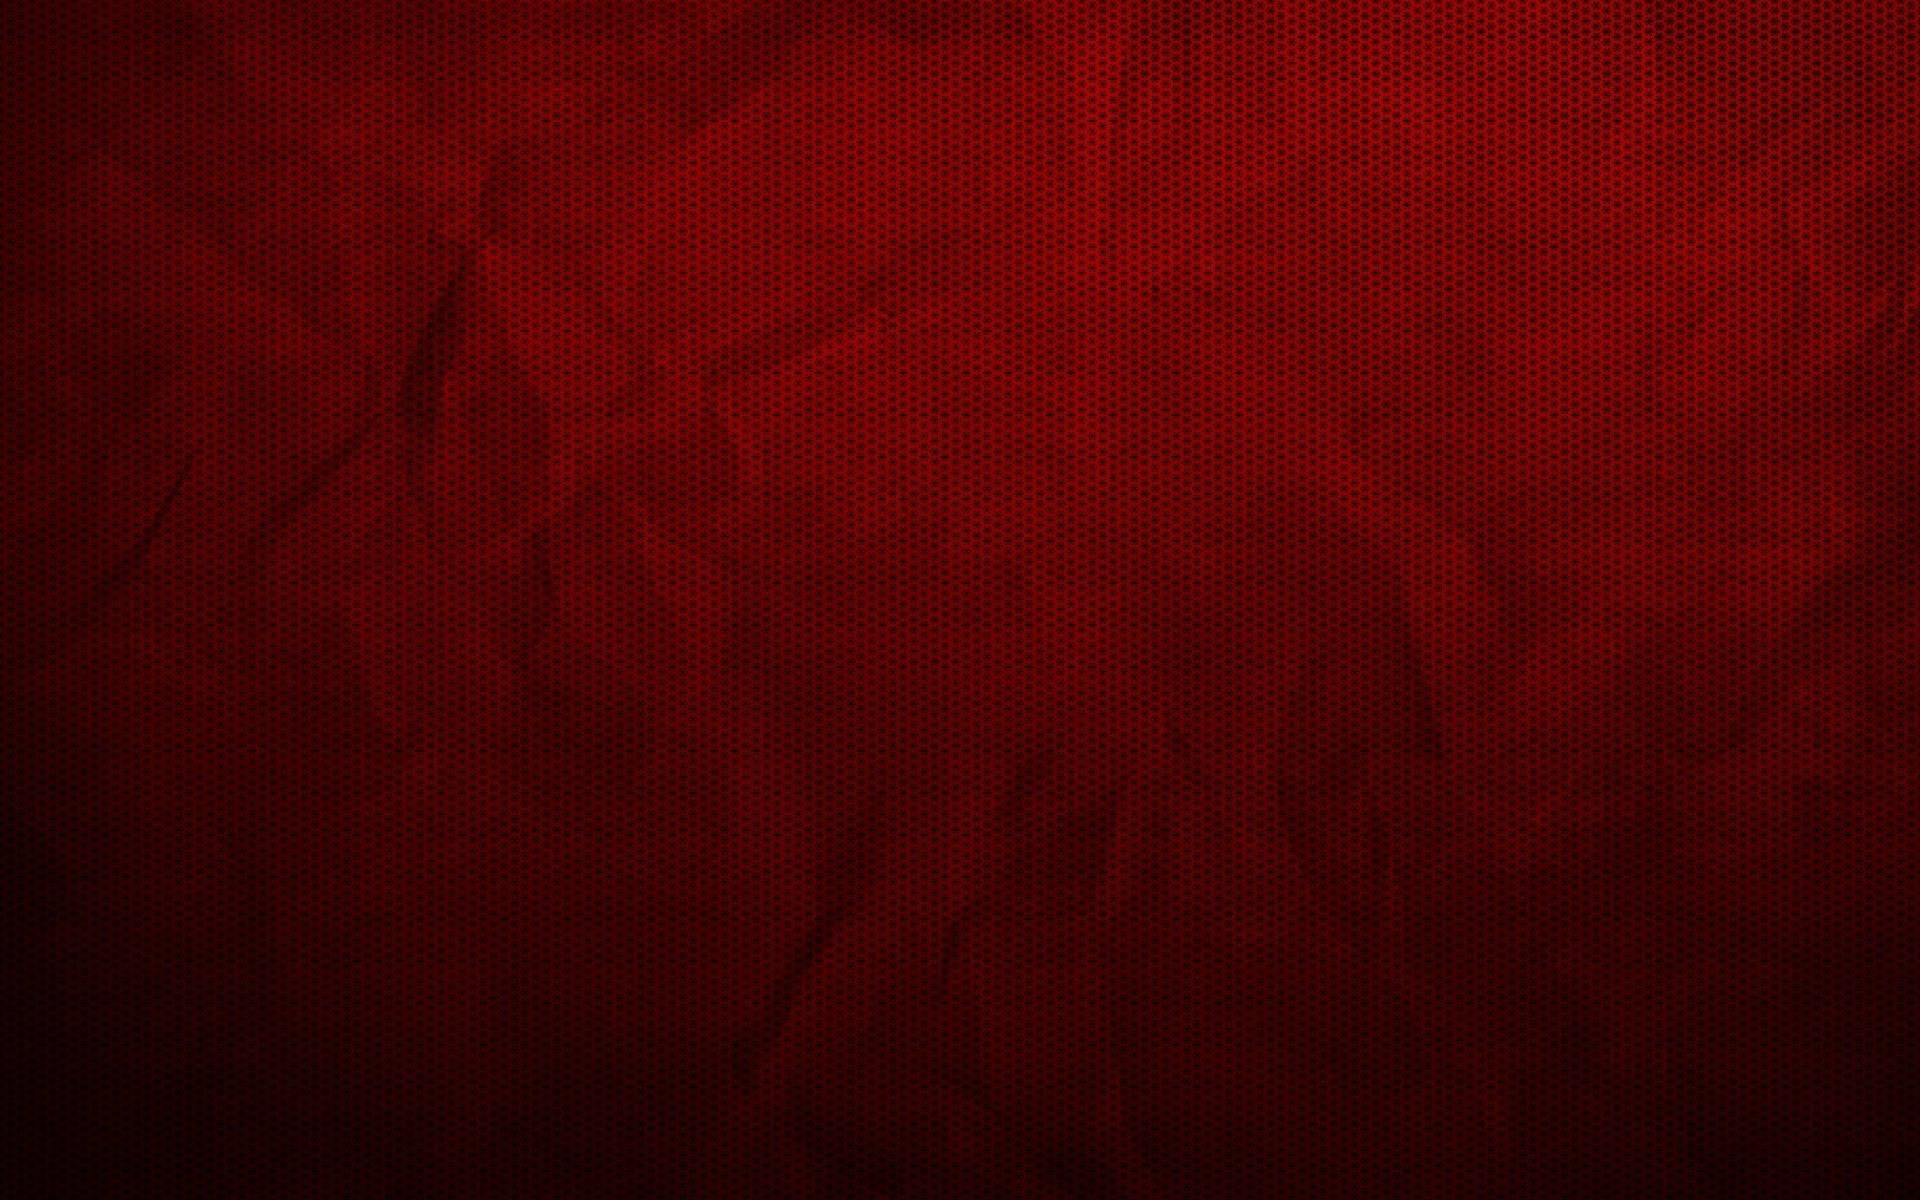 Download Plain Red Creased Texture Wallpaper 